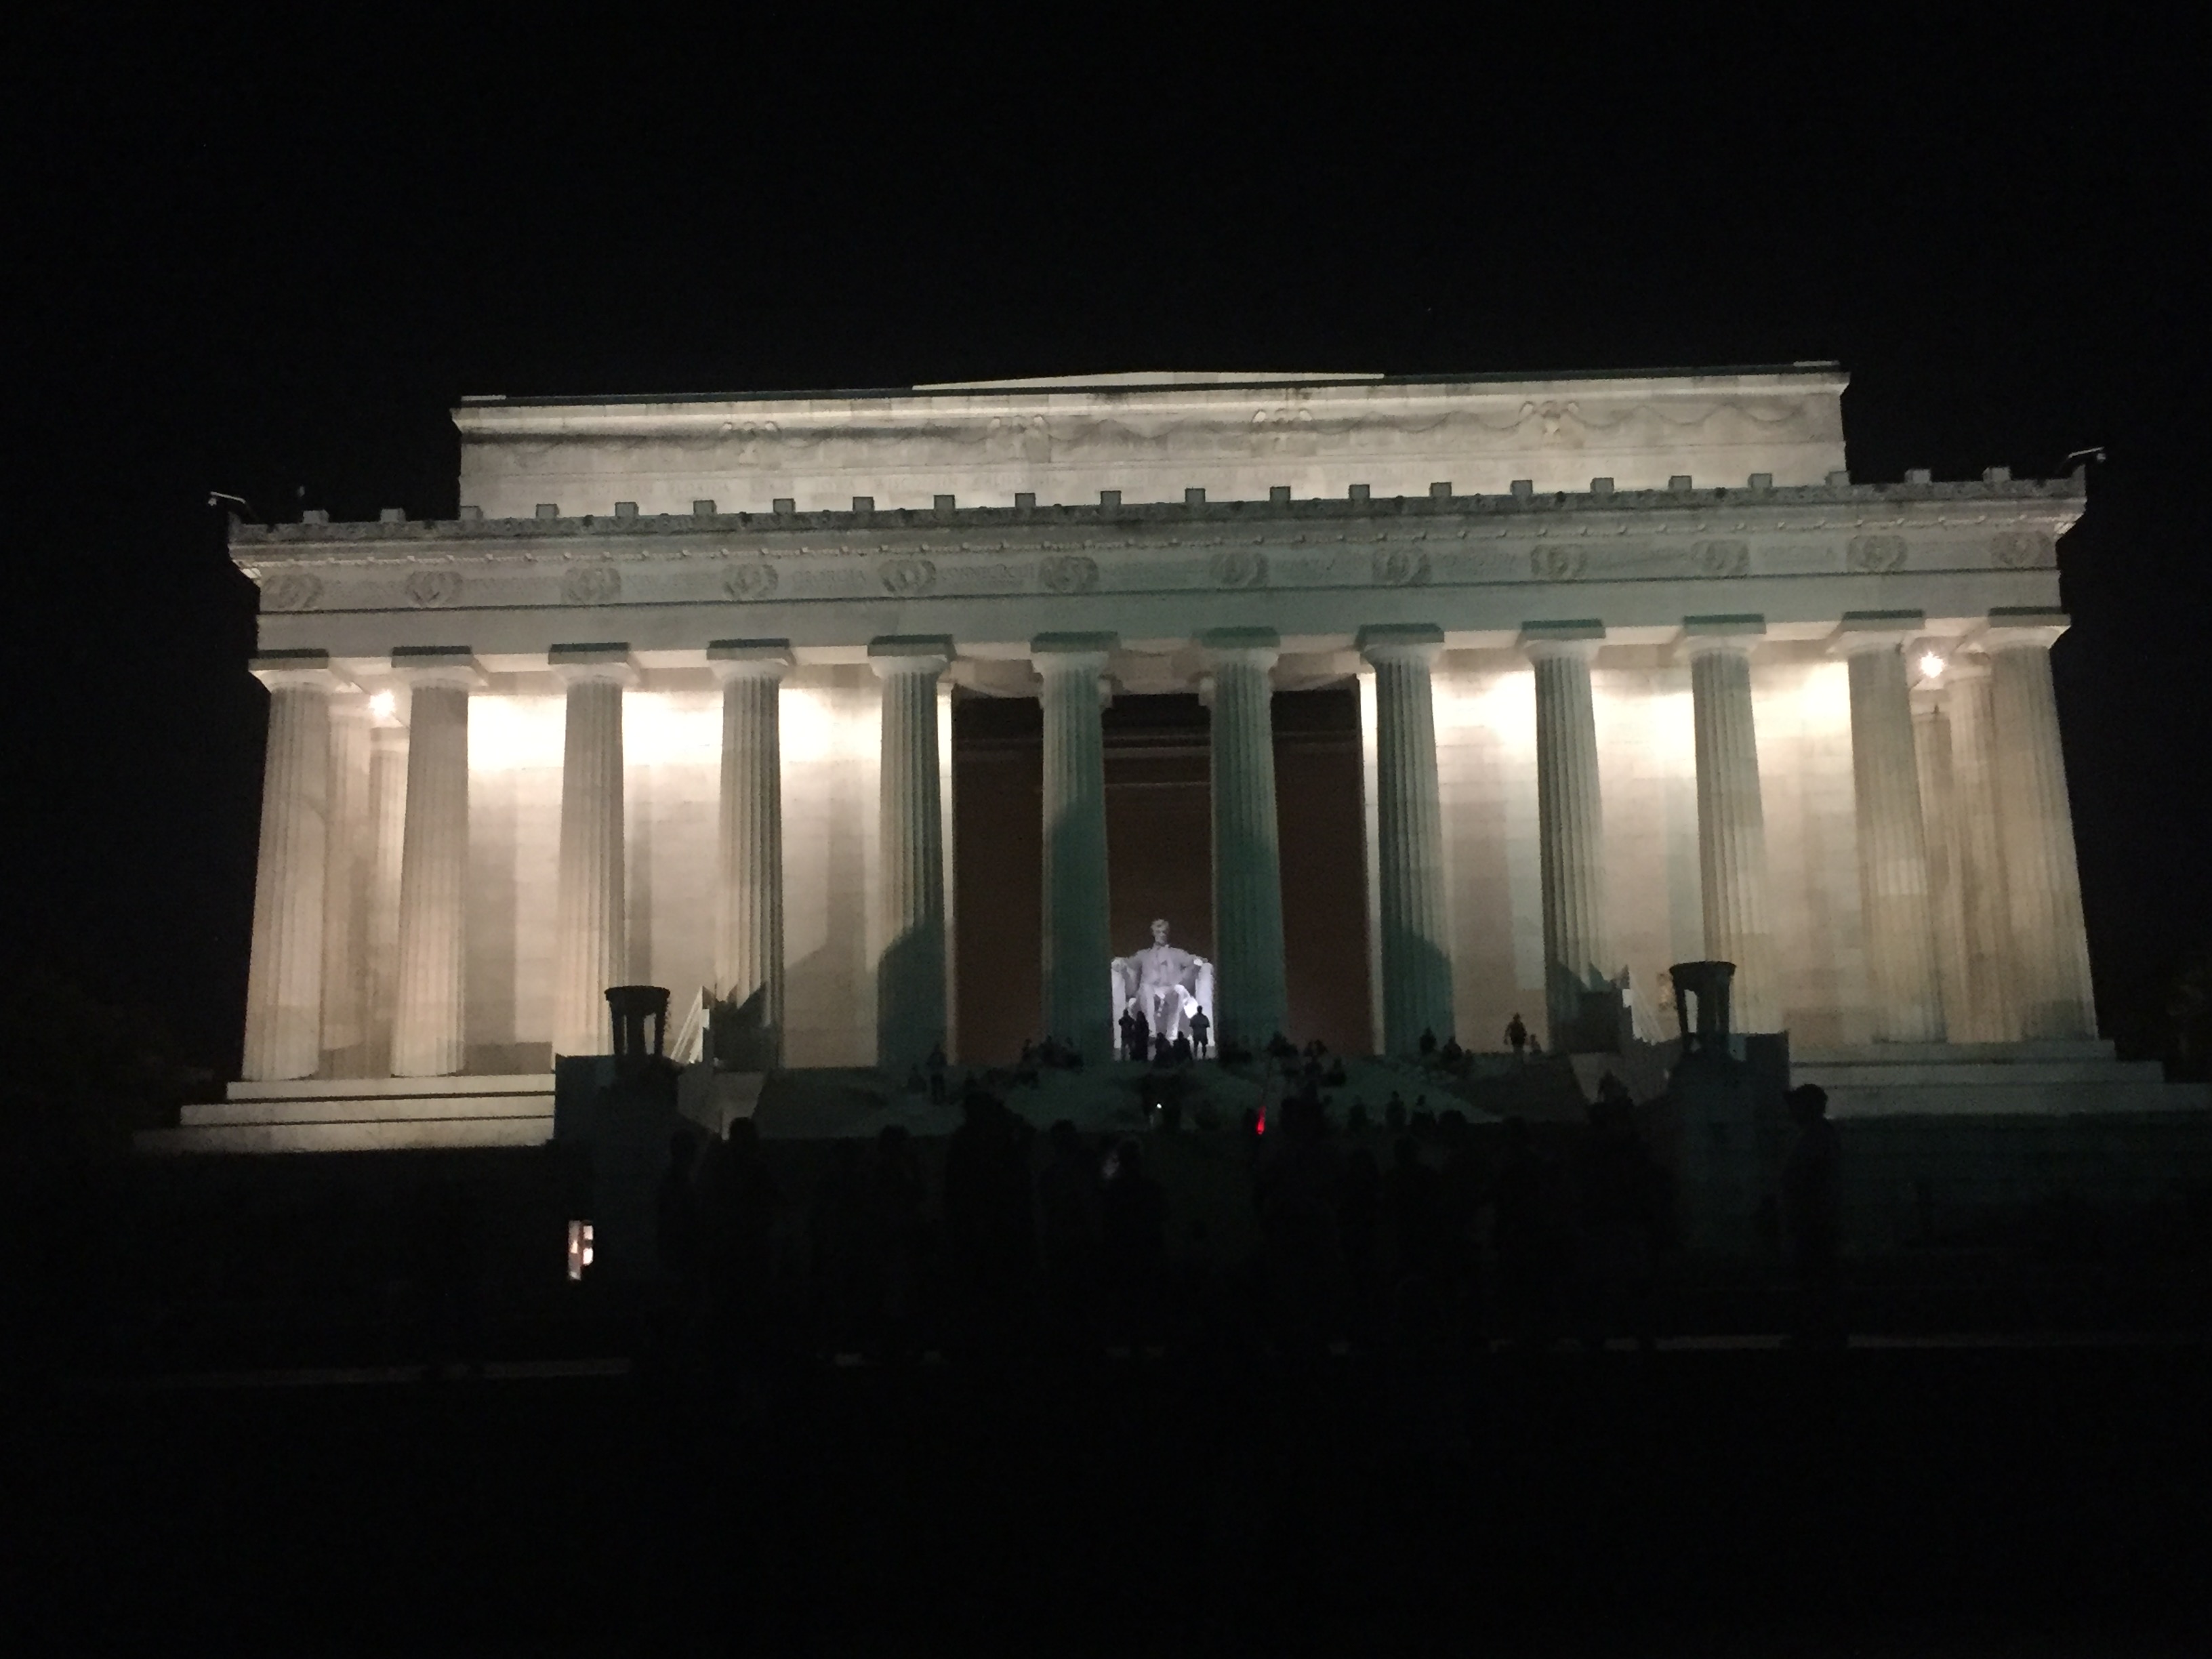 Image of the Lincoln Memorial at night, lit with white lights